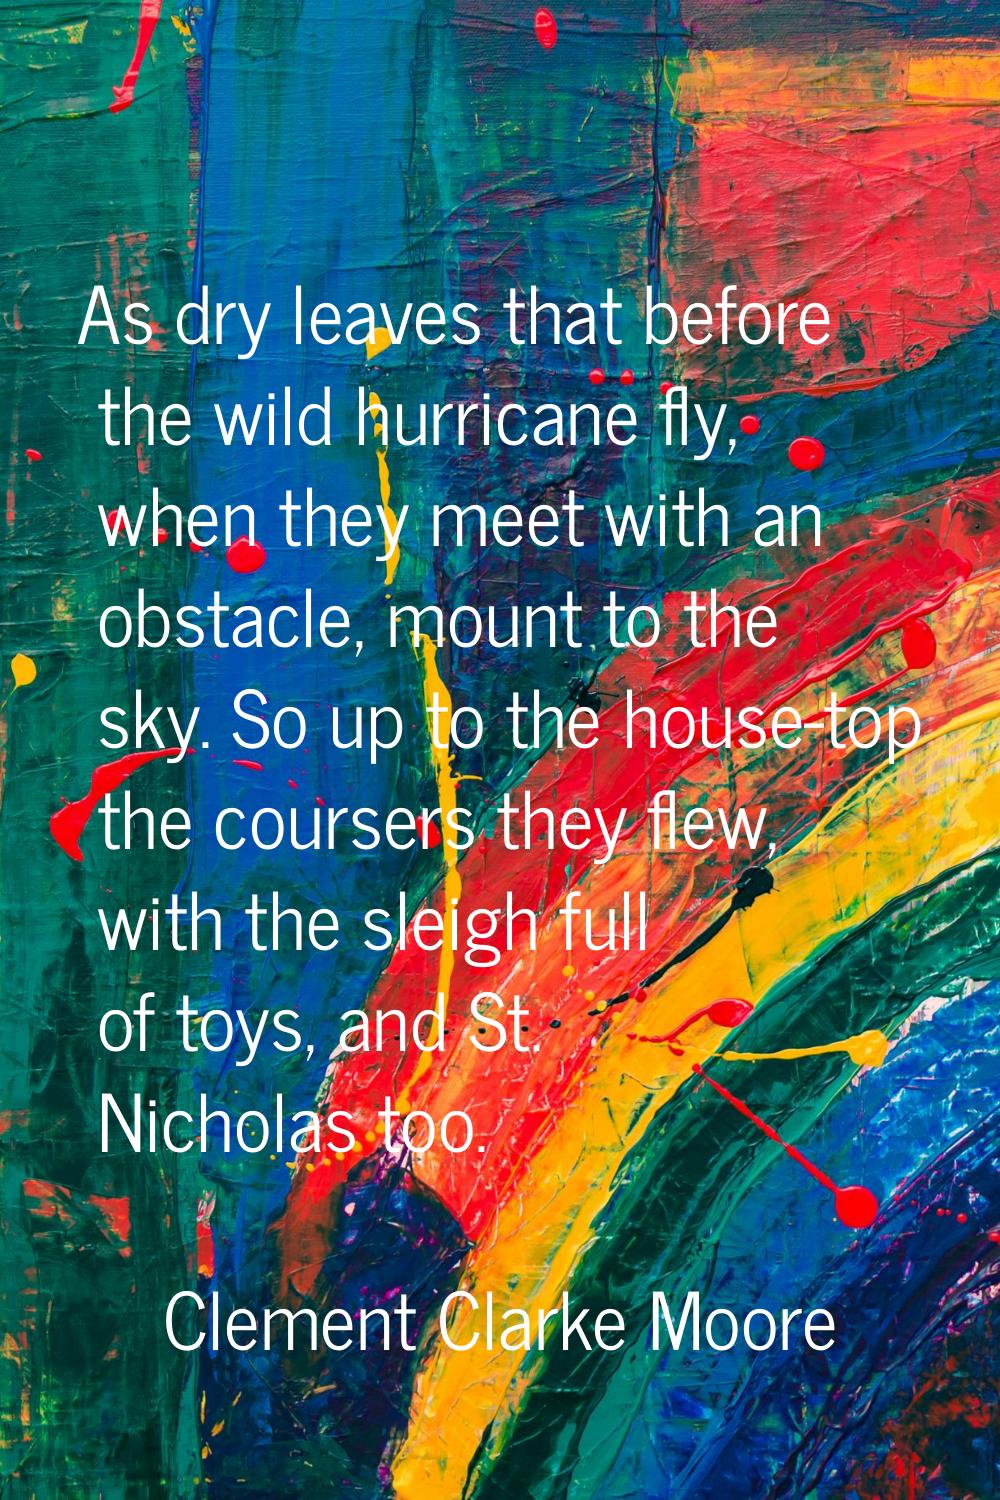 As dry leaves that before the wild hurricane fly, when they meet with an obstacle, mount to the sky